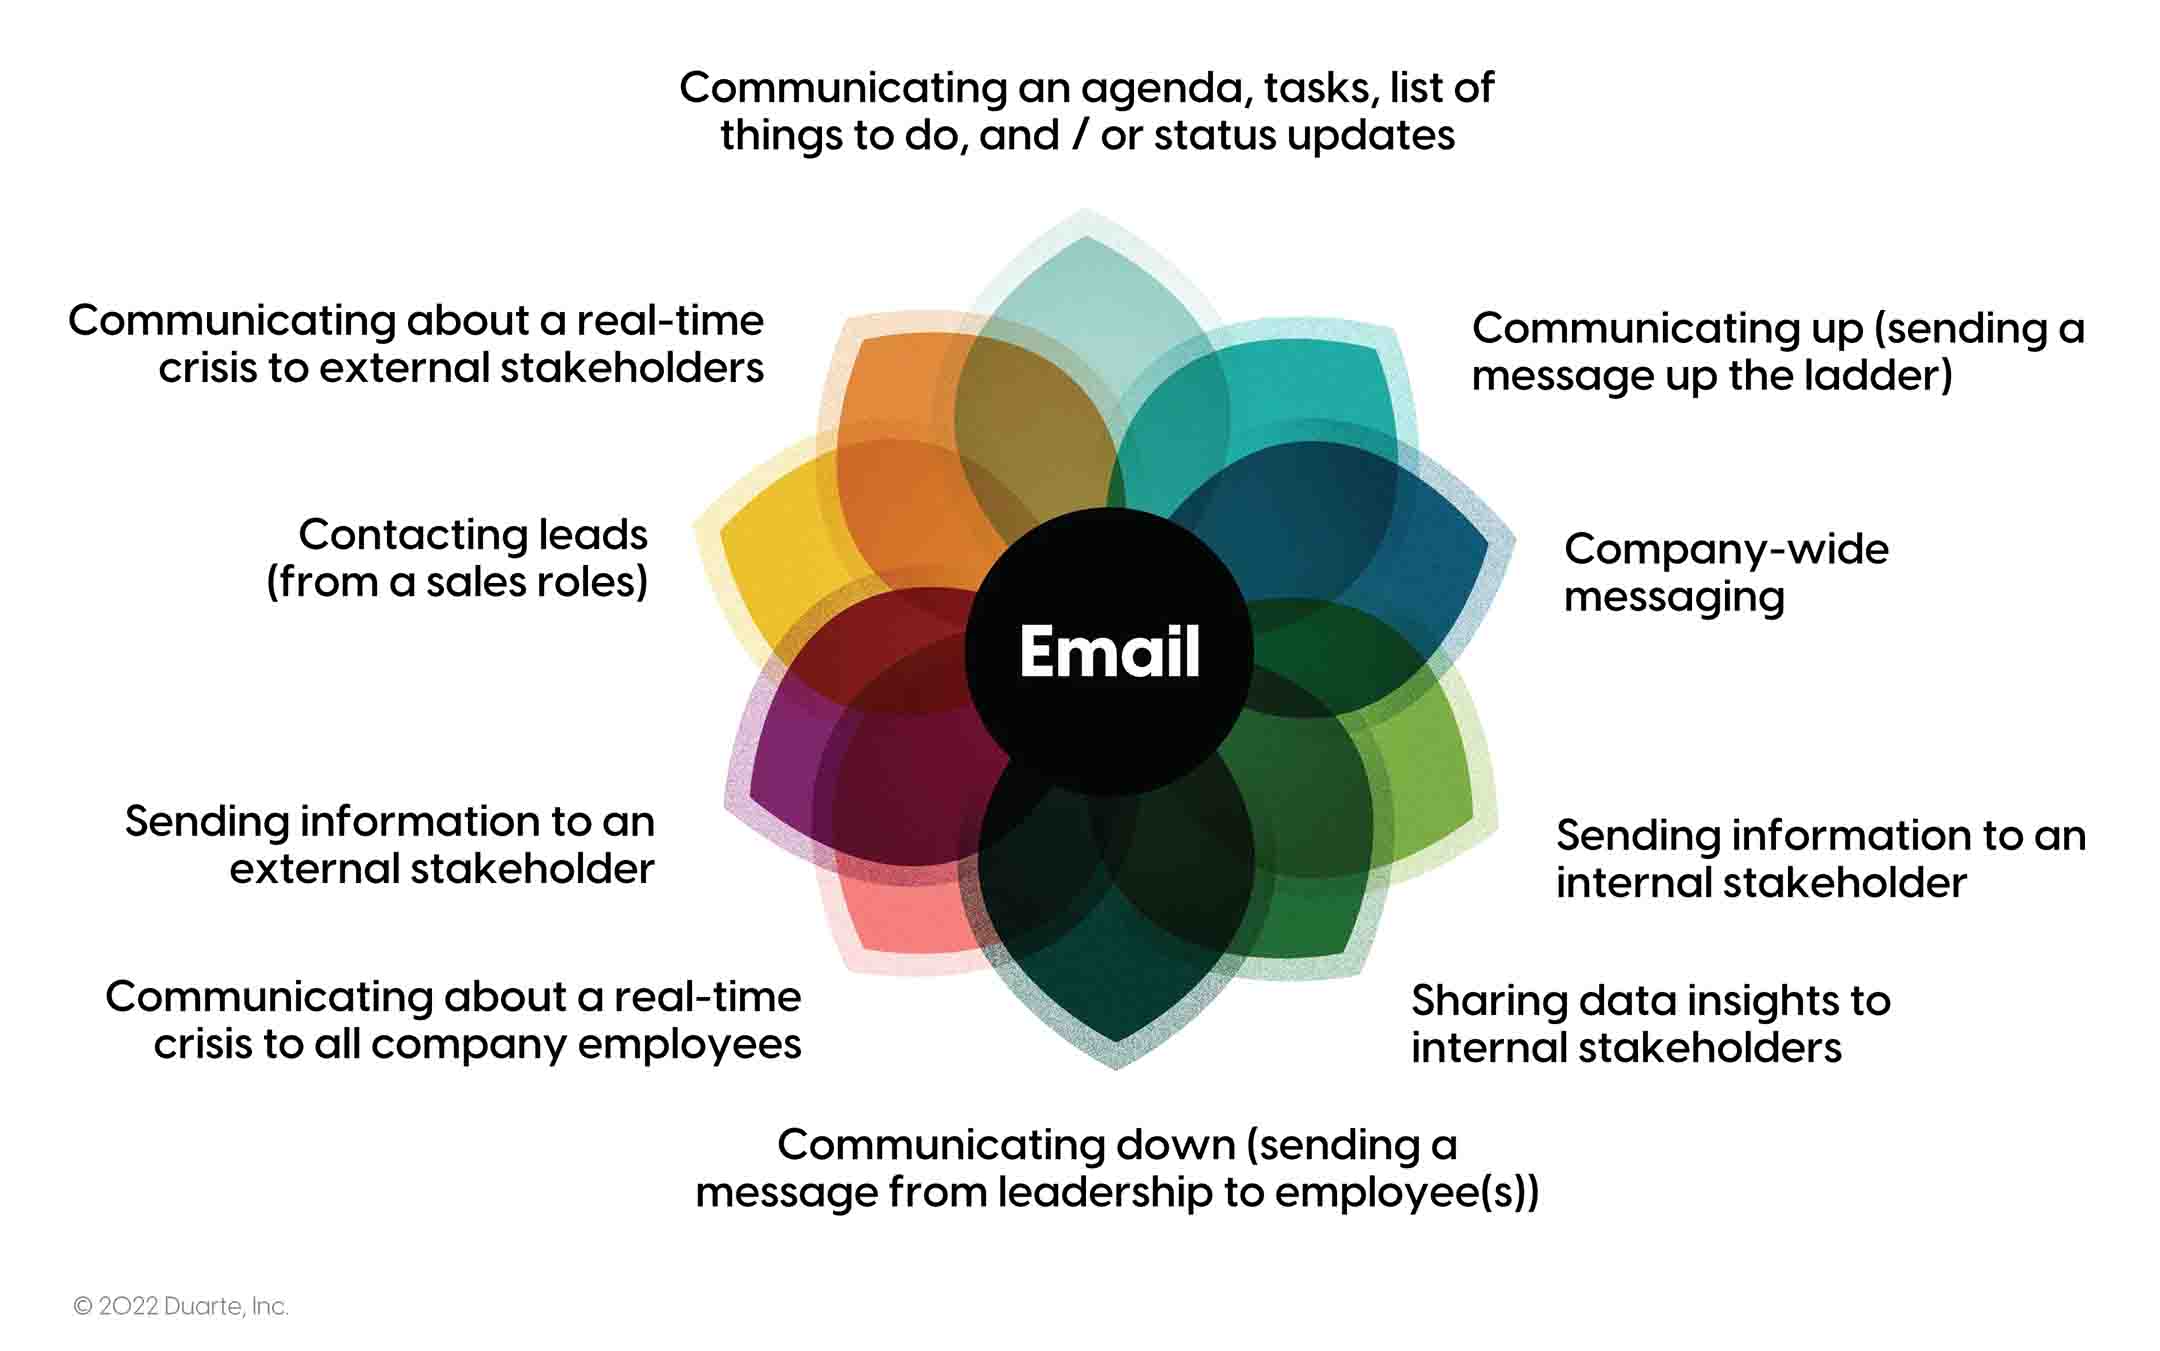 This figure shows a design resembling a flower, with the word “email” in the center and each petal is pointing to a different context and situation. This design intends to communicate the different scenarios in which email is preferred. In our survey, respondents identified email as the preferred communication channel in the following scenarios: Communicating an agenda or tasks, communicating up (sending a message up the ladder), company-wide messaging, sending information to an internal stakeholder, sharing data insights to internal stakeholders, communicating down (sending a message from leadership to employee(s)), communicating about a real time crisis to all employees, sending information to an external stakeholder, contacting leads (from a sales role), and communicating about a real time crisis to external stakeholders.